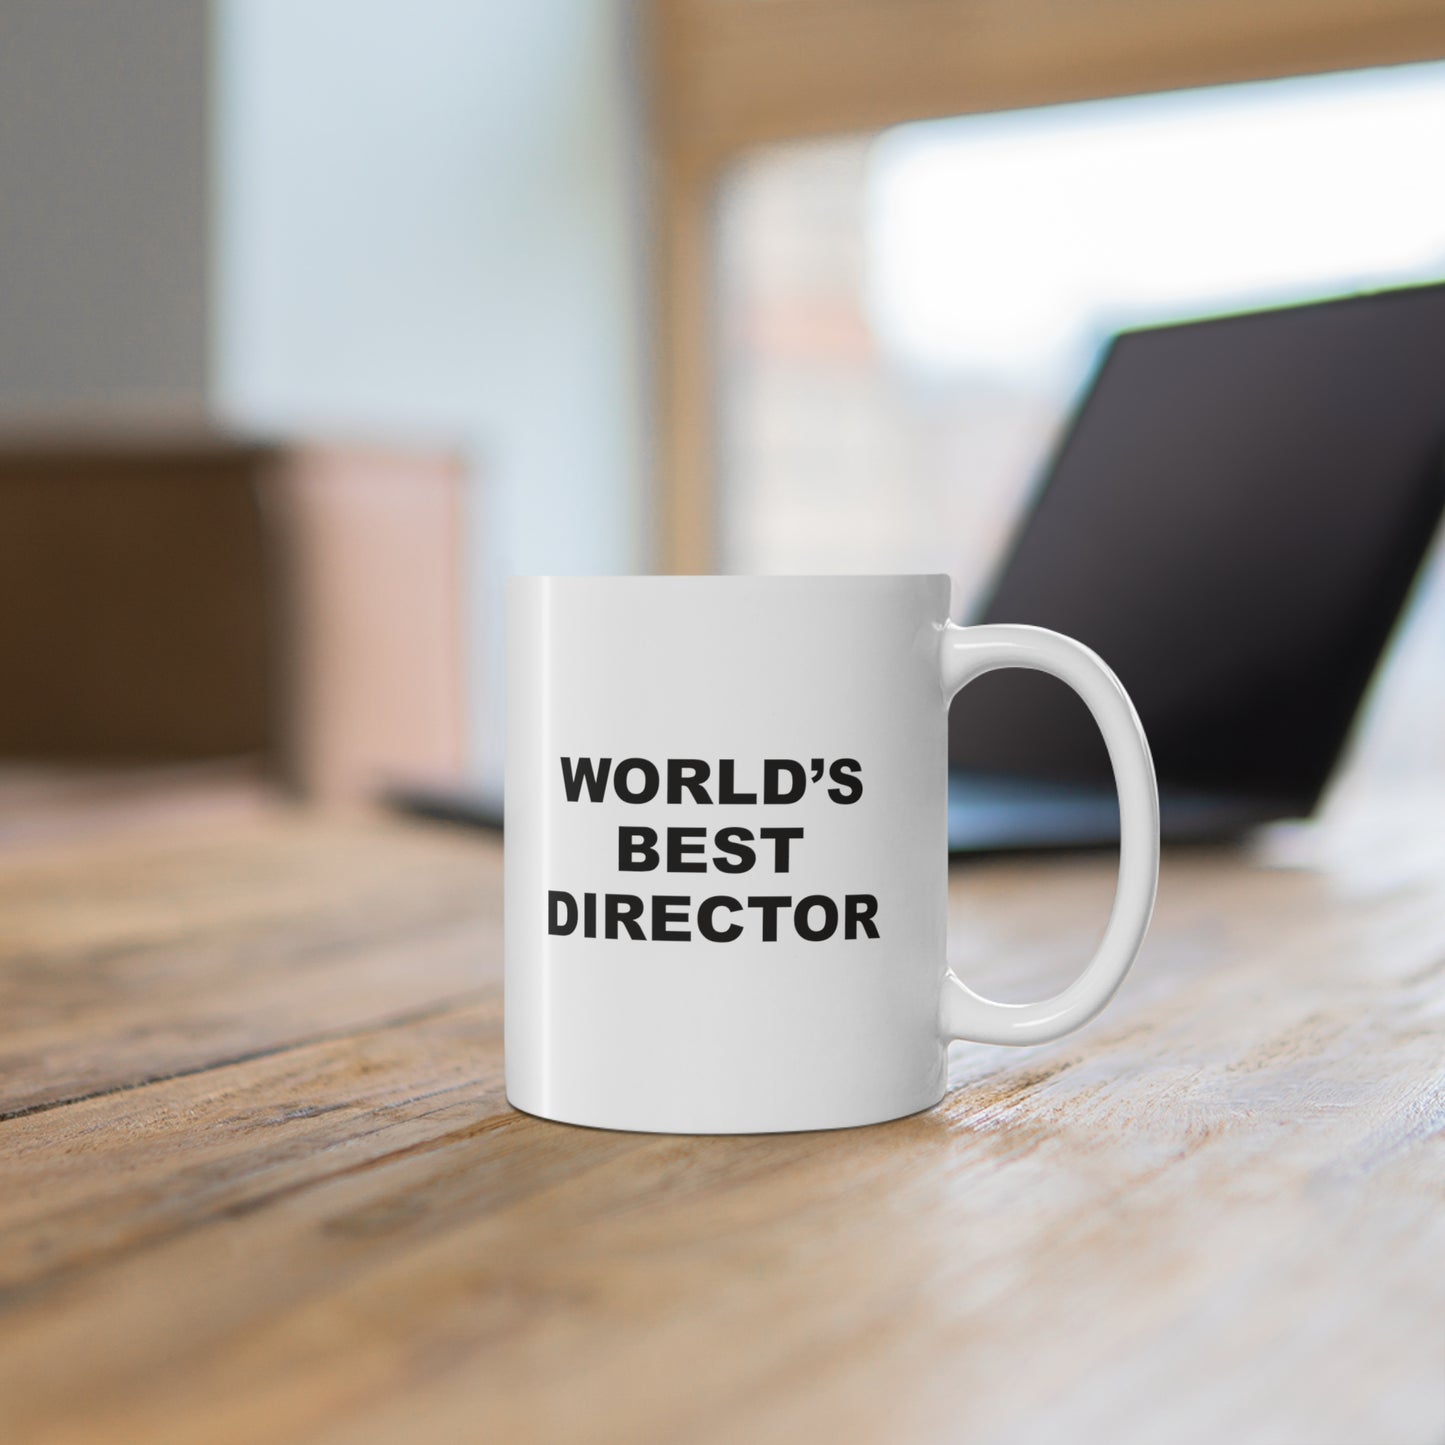 11oz ceramic mug with quote World's Best Director